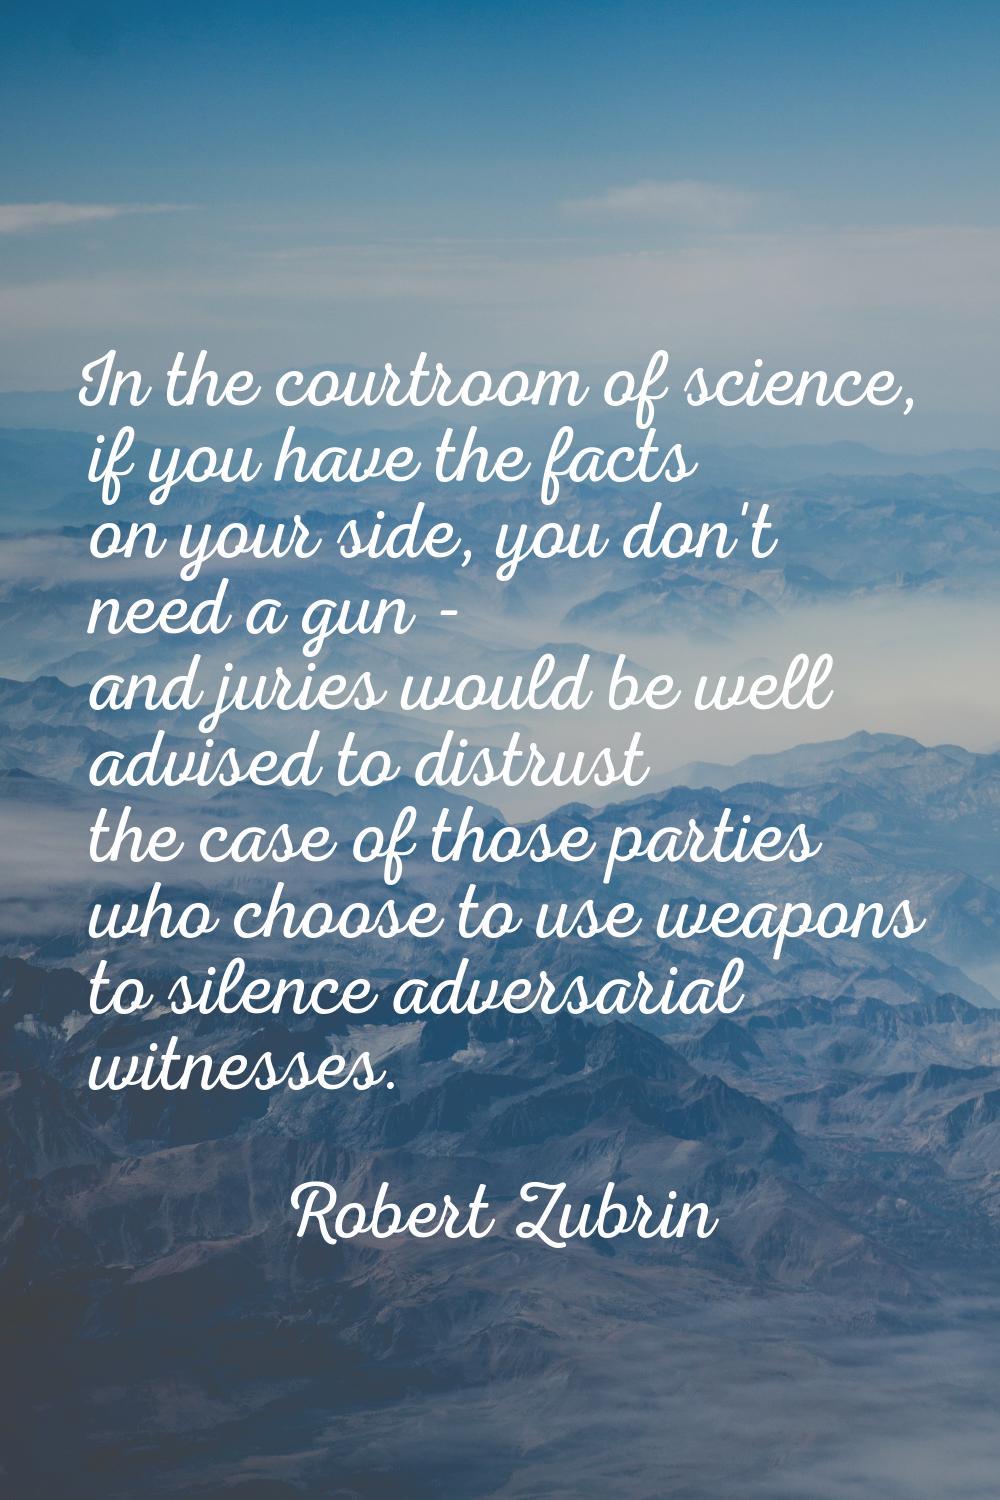 In the courtroom of science, if you have the facts on your side, you don't need a gun - and juries 